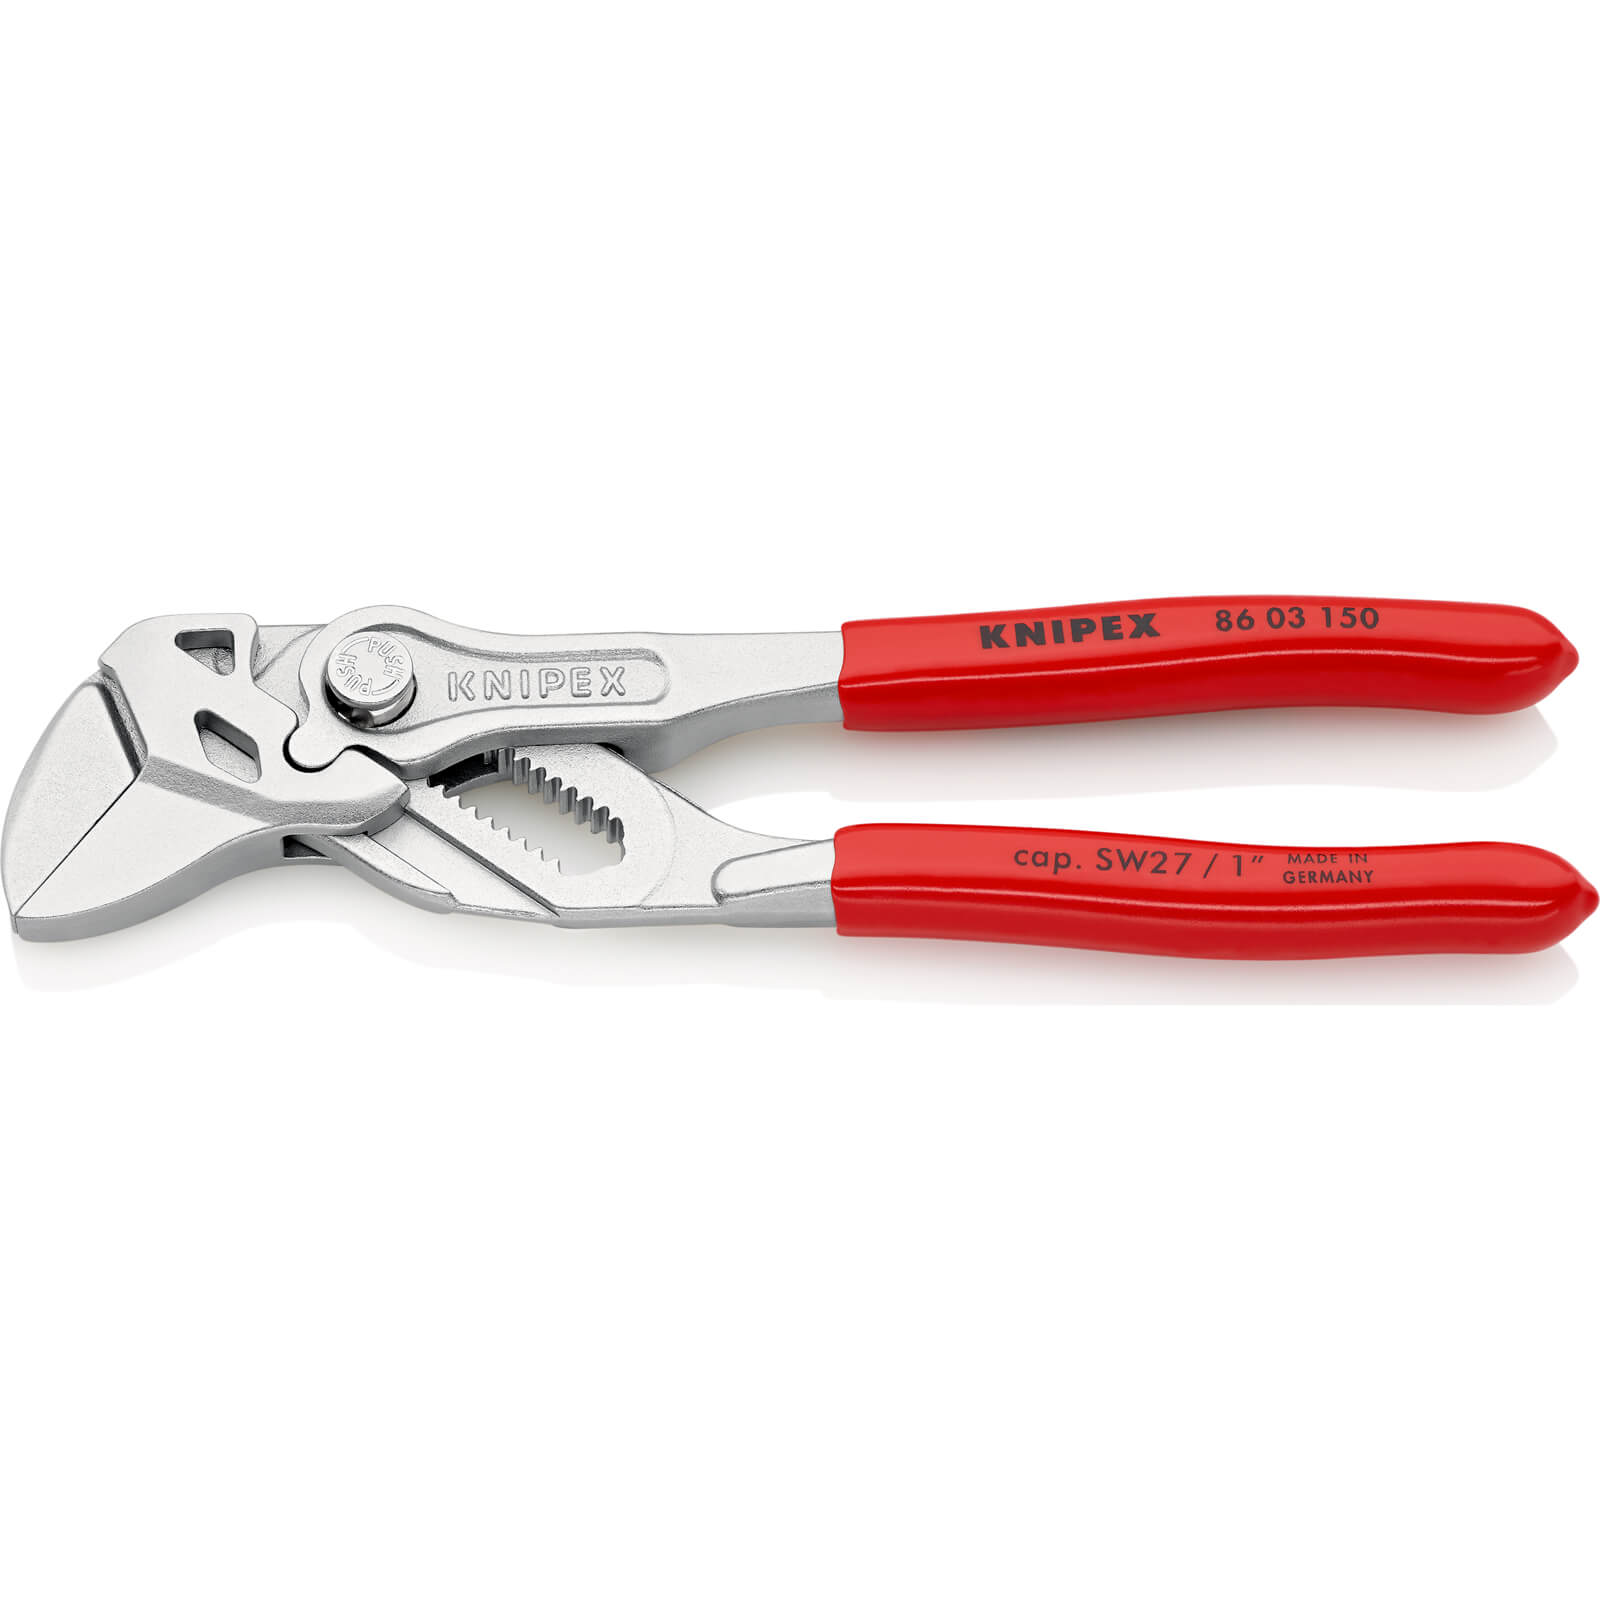 Image of Knipex 86 03 Chrome Plier Nut Wrenches 150mm